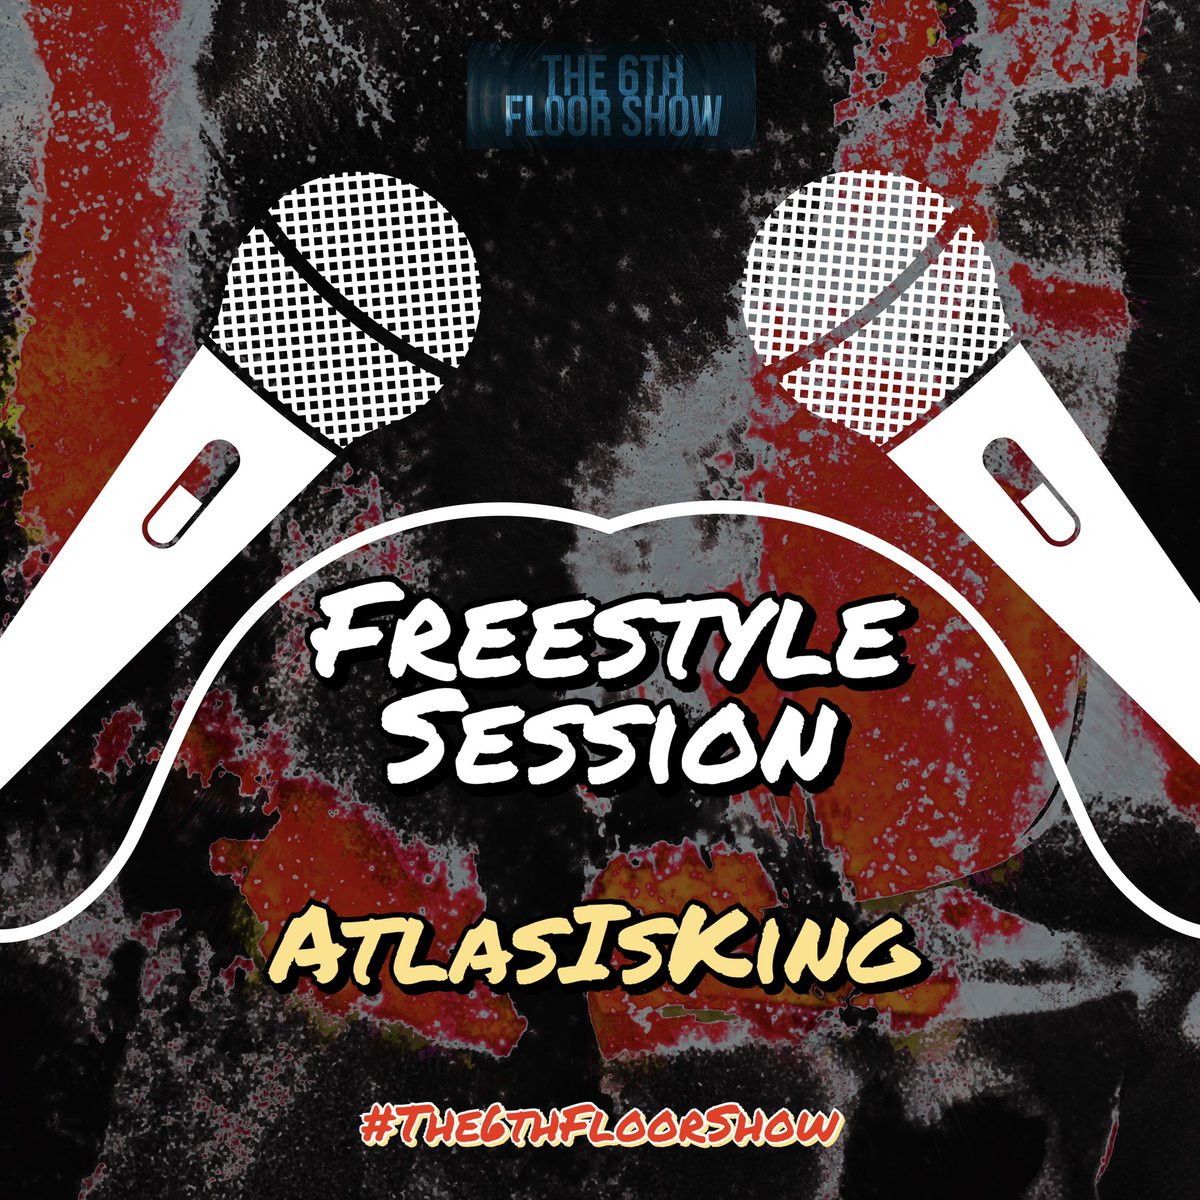 Next up on the #FreestyleSession on this weeks episode of @The6thFloorShow is… @AtlasIsKing Produced by #6thFloor The freestyle is available now on #SoundCloud & #Audiomack on.soundcloud.com/WDUn7iCHmMmyT5… audiomack.com/6thfloorfreest…